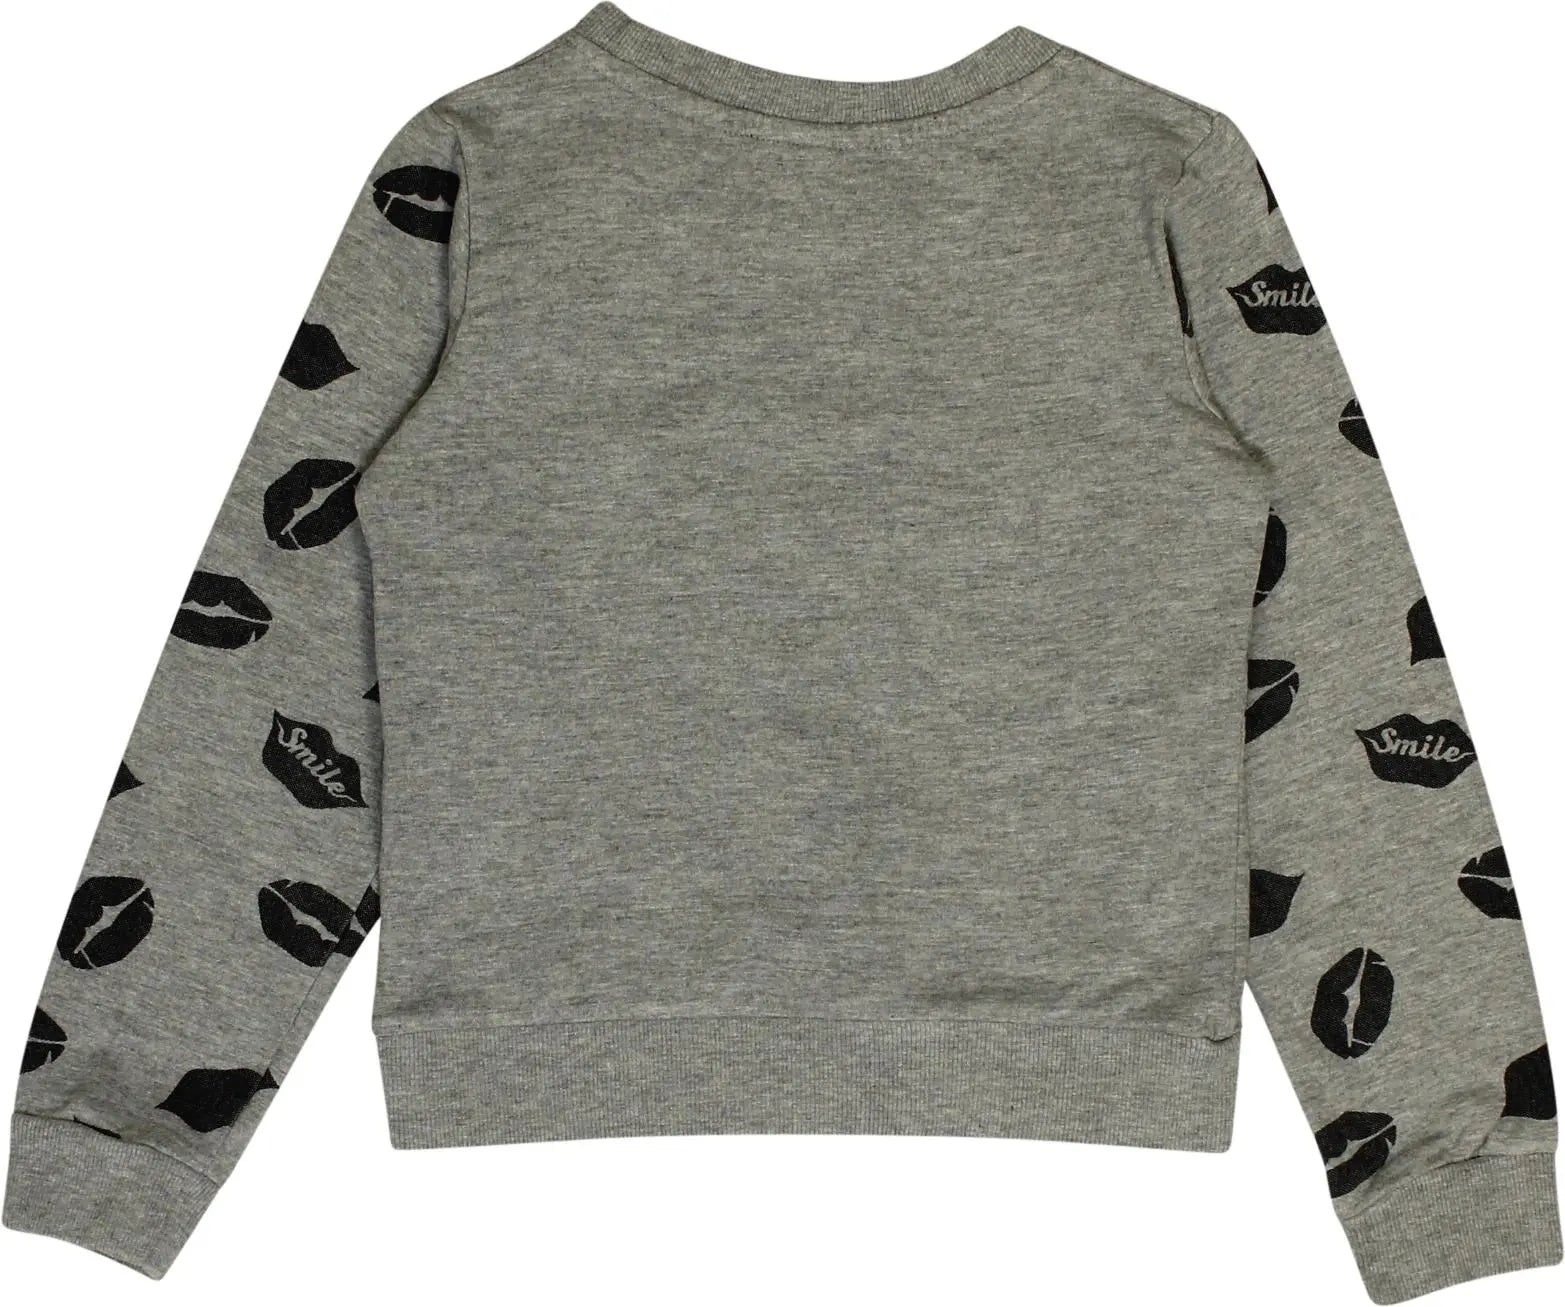 Unknown - Grey Sweatshirt- ThriftTale.com - Vintage and second handclothing